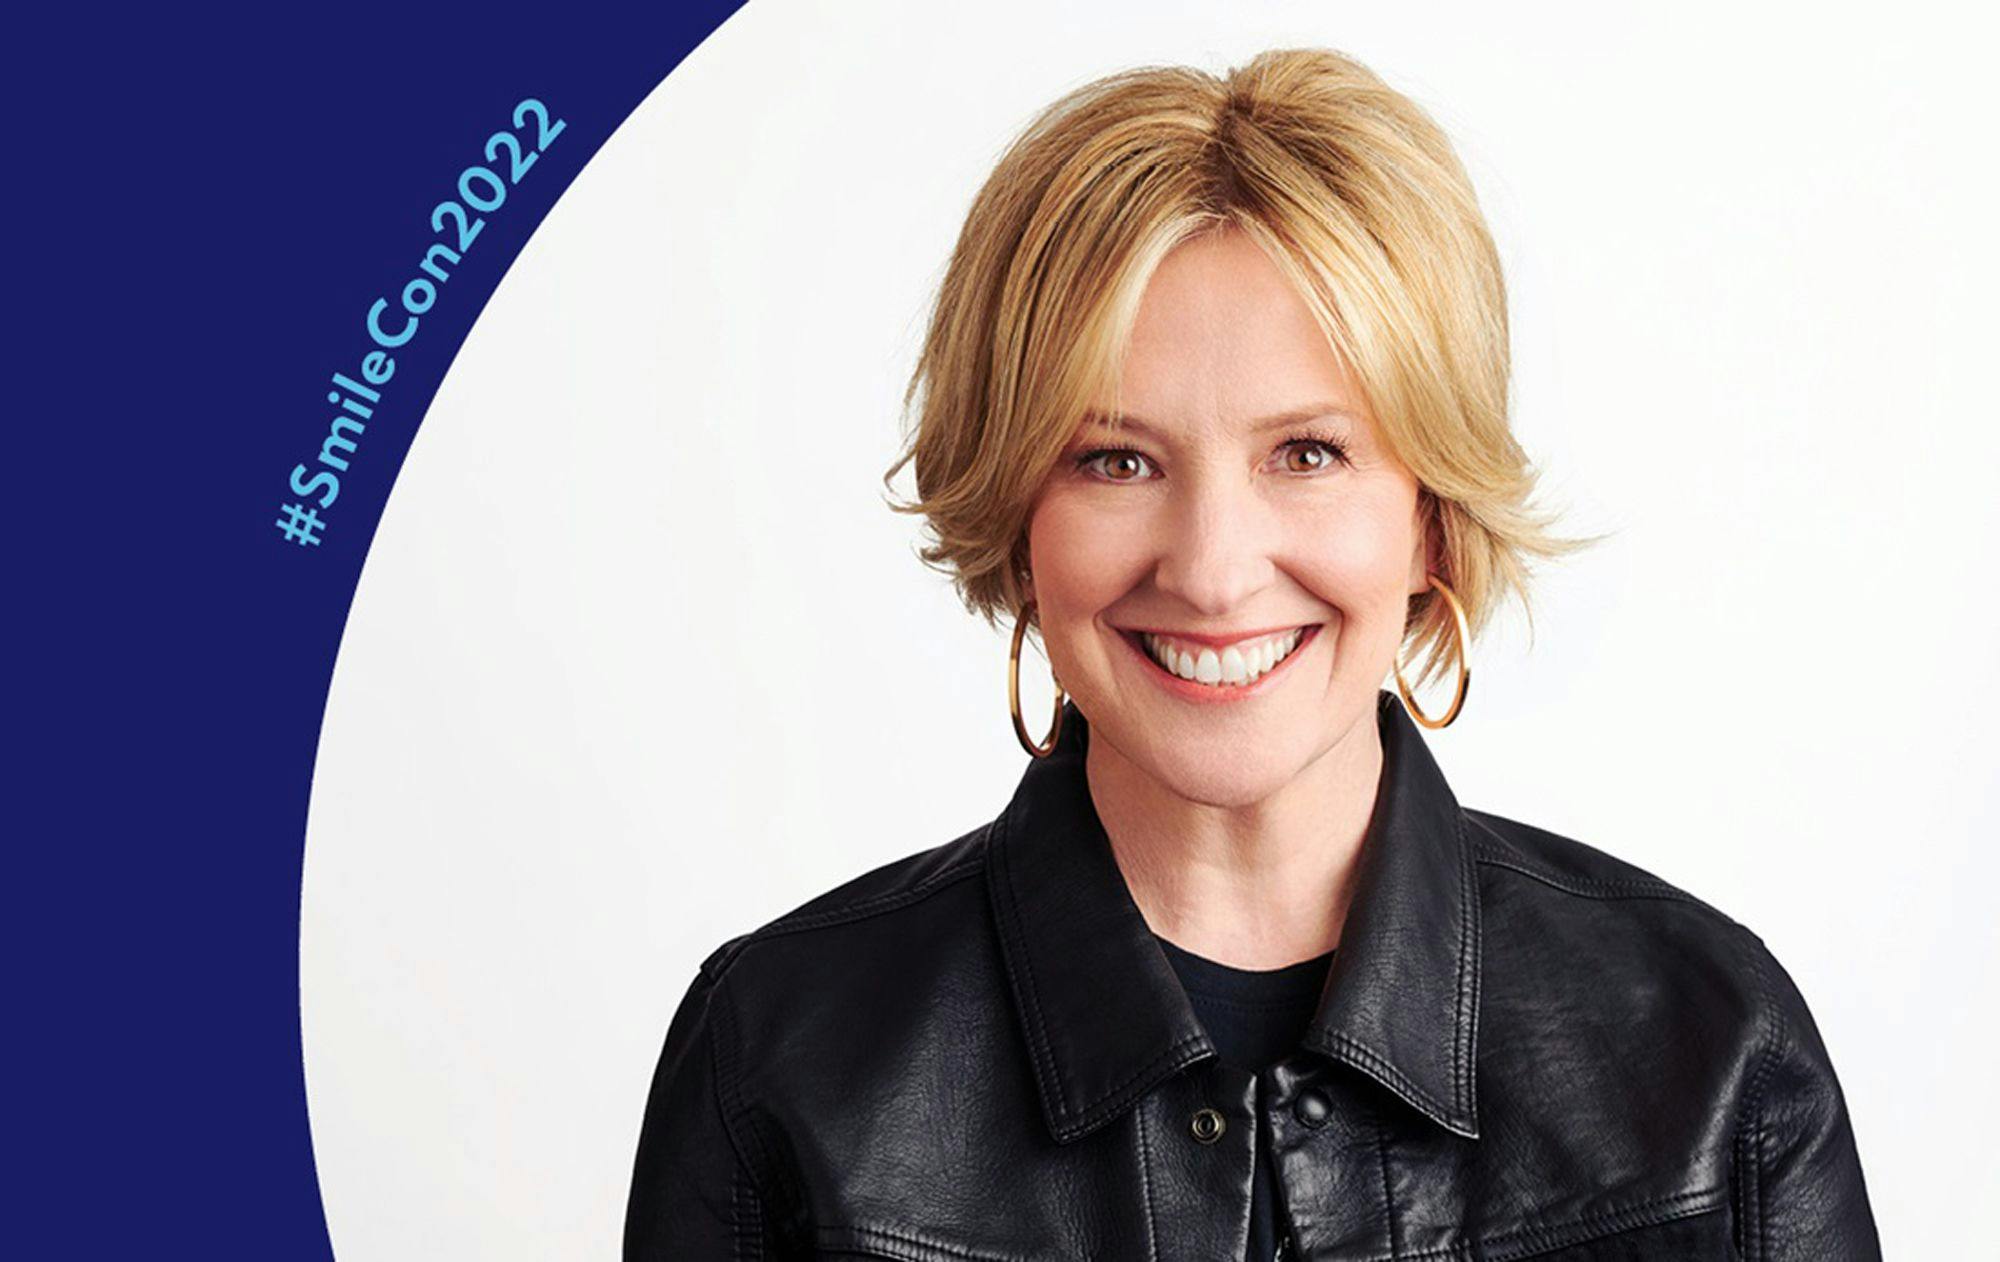 Author and TED Talk Speaker Brené Brown to Kick Off SmileCon 2022